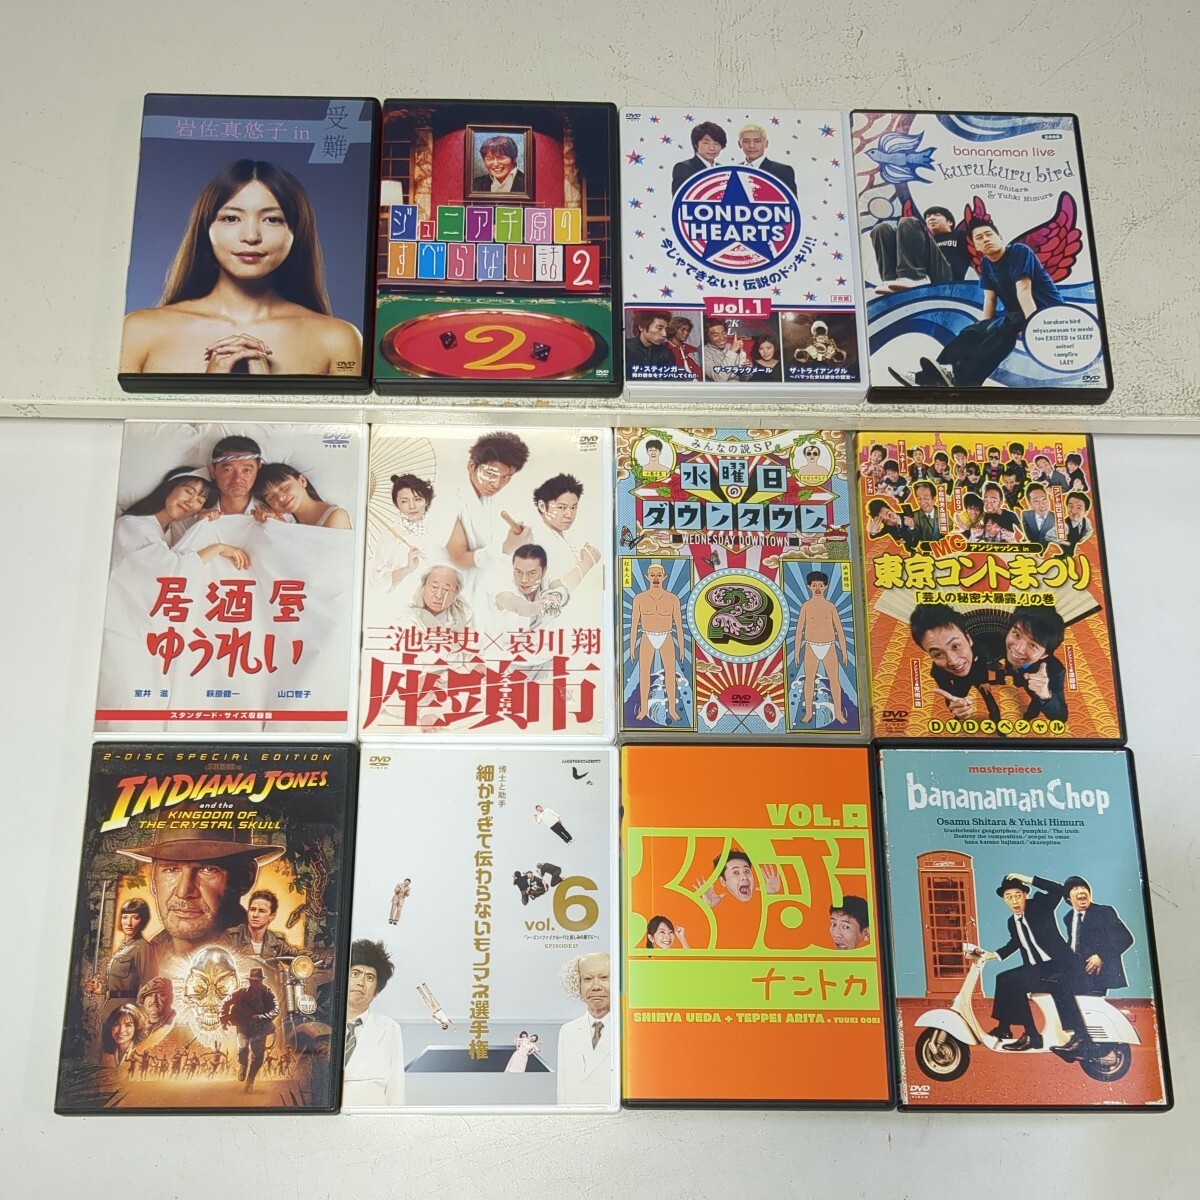 5139 approximately 45ps.@DVD new goods used Japanese film Western films variety - genre various set sale 